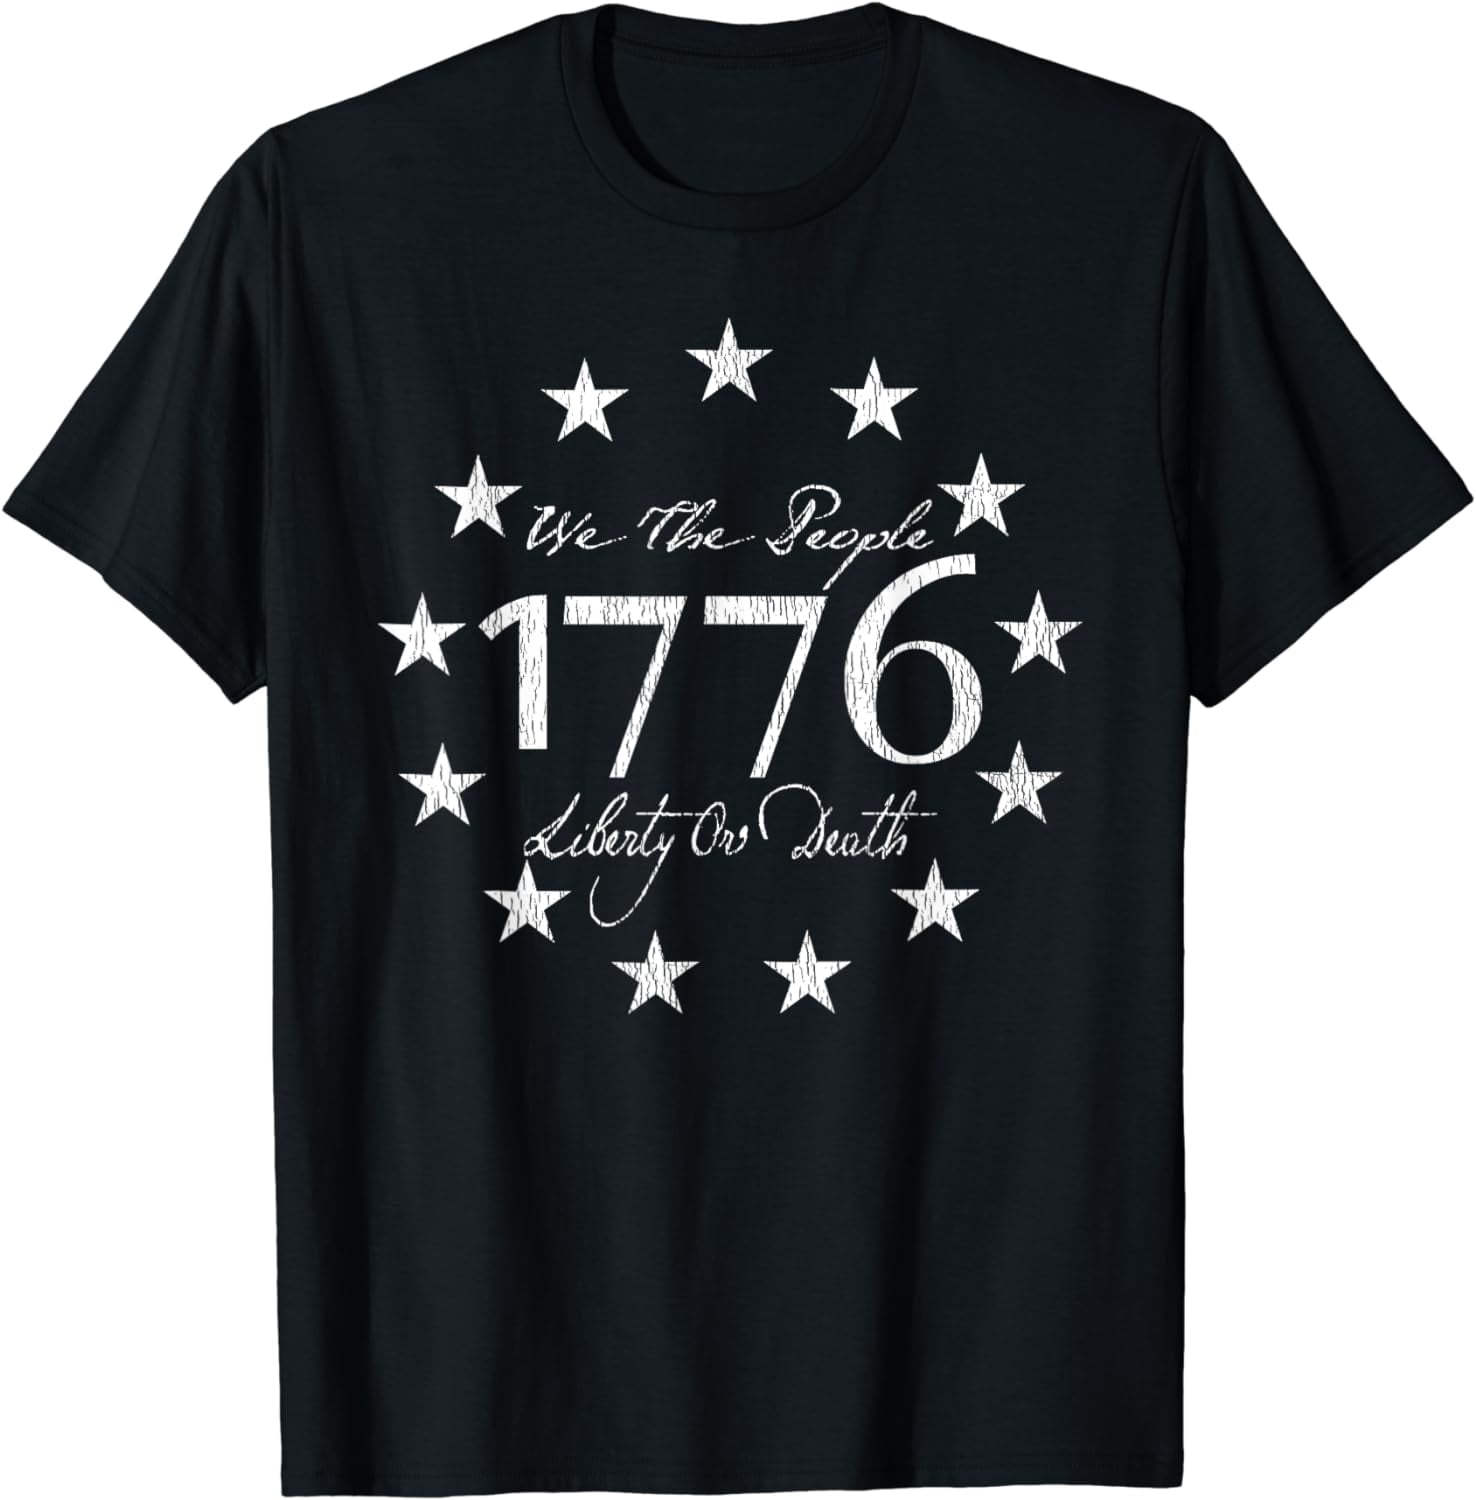 1776 We The People Liberty Or Death American Revolution T-Shirt ...